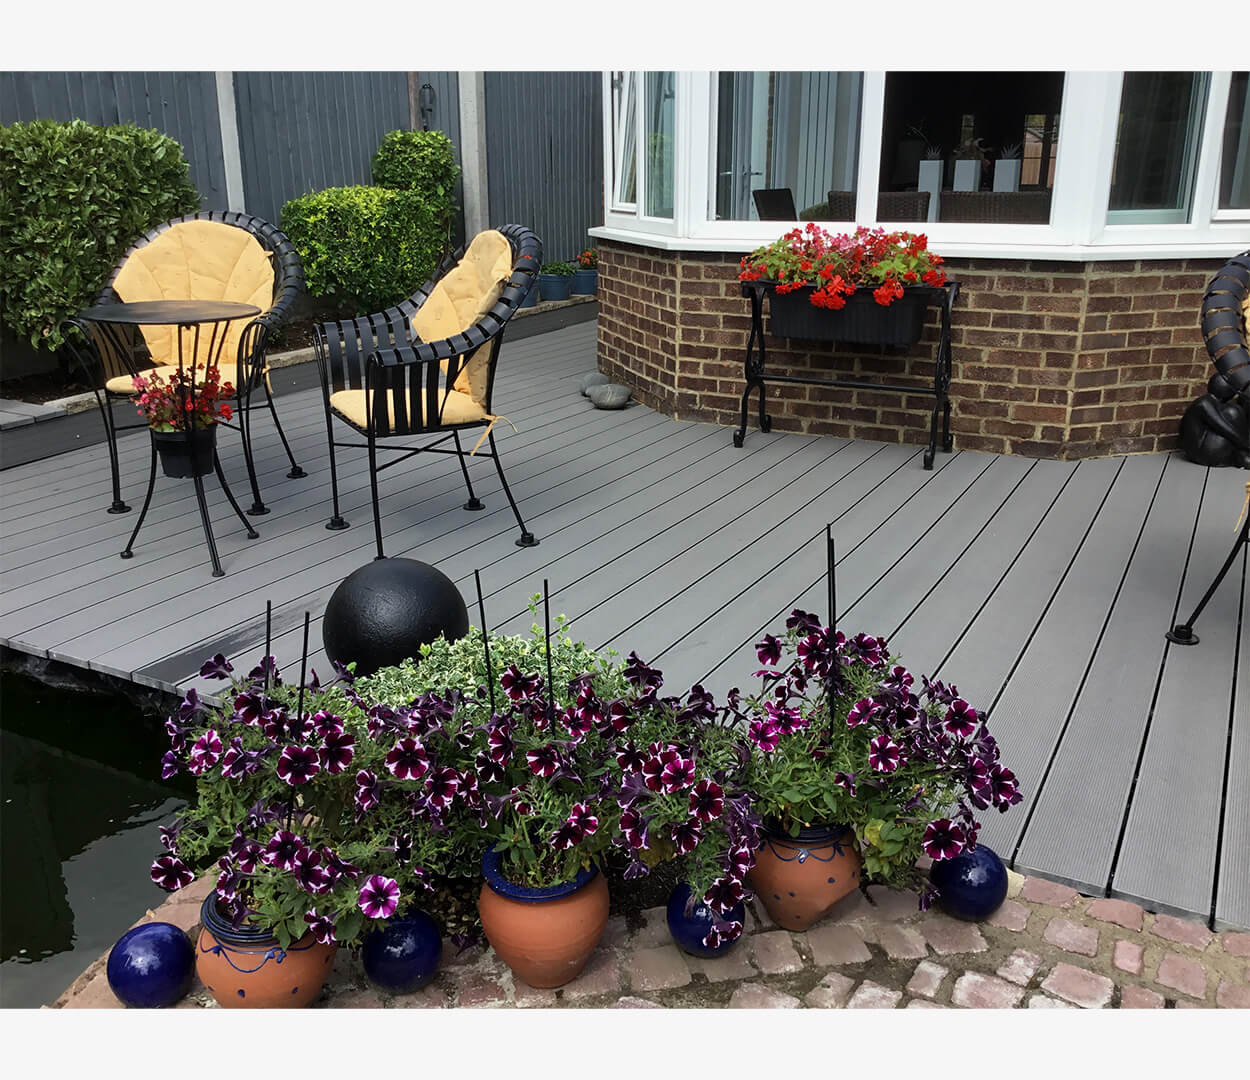 Cladco Composite Decking Boards in Stone Grey with Floral & Stone Boarder